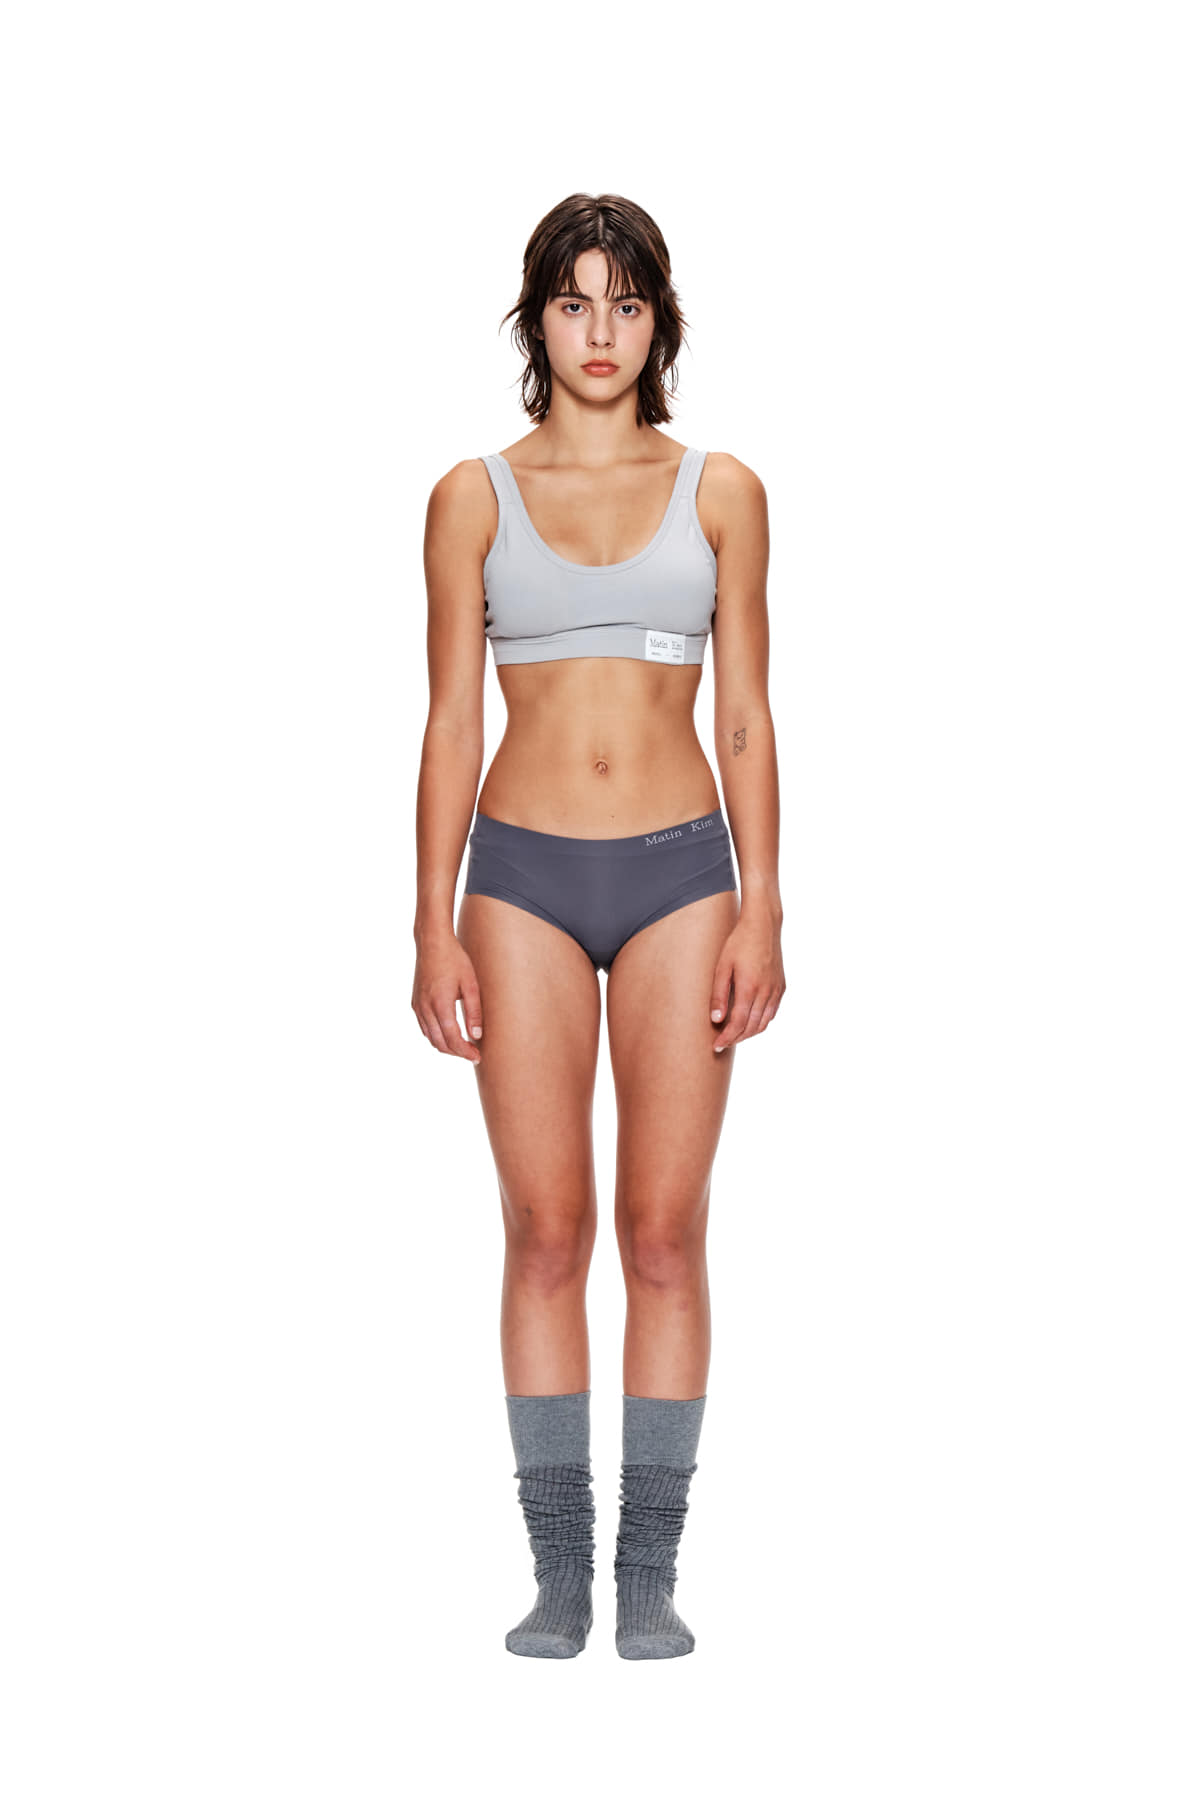 COMFY SEAMLESS BRIEF IN CHARCOAL